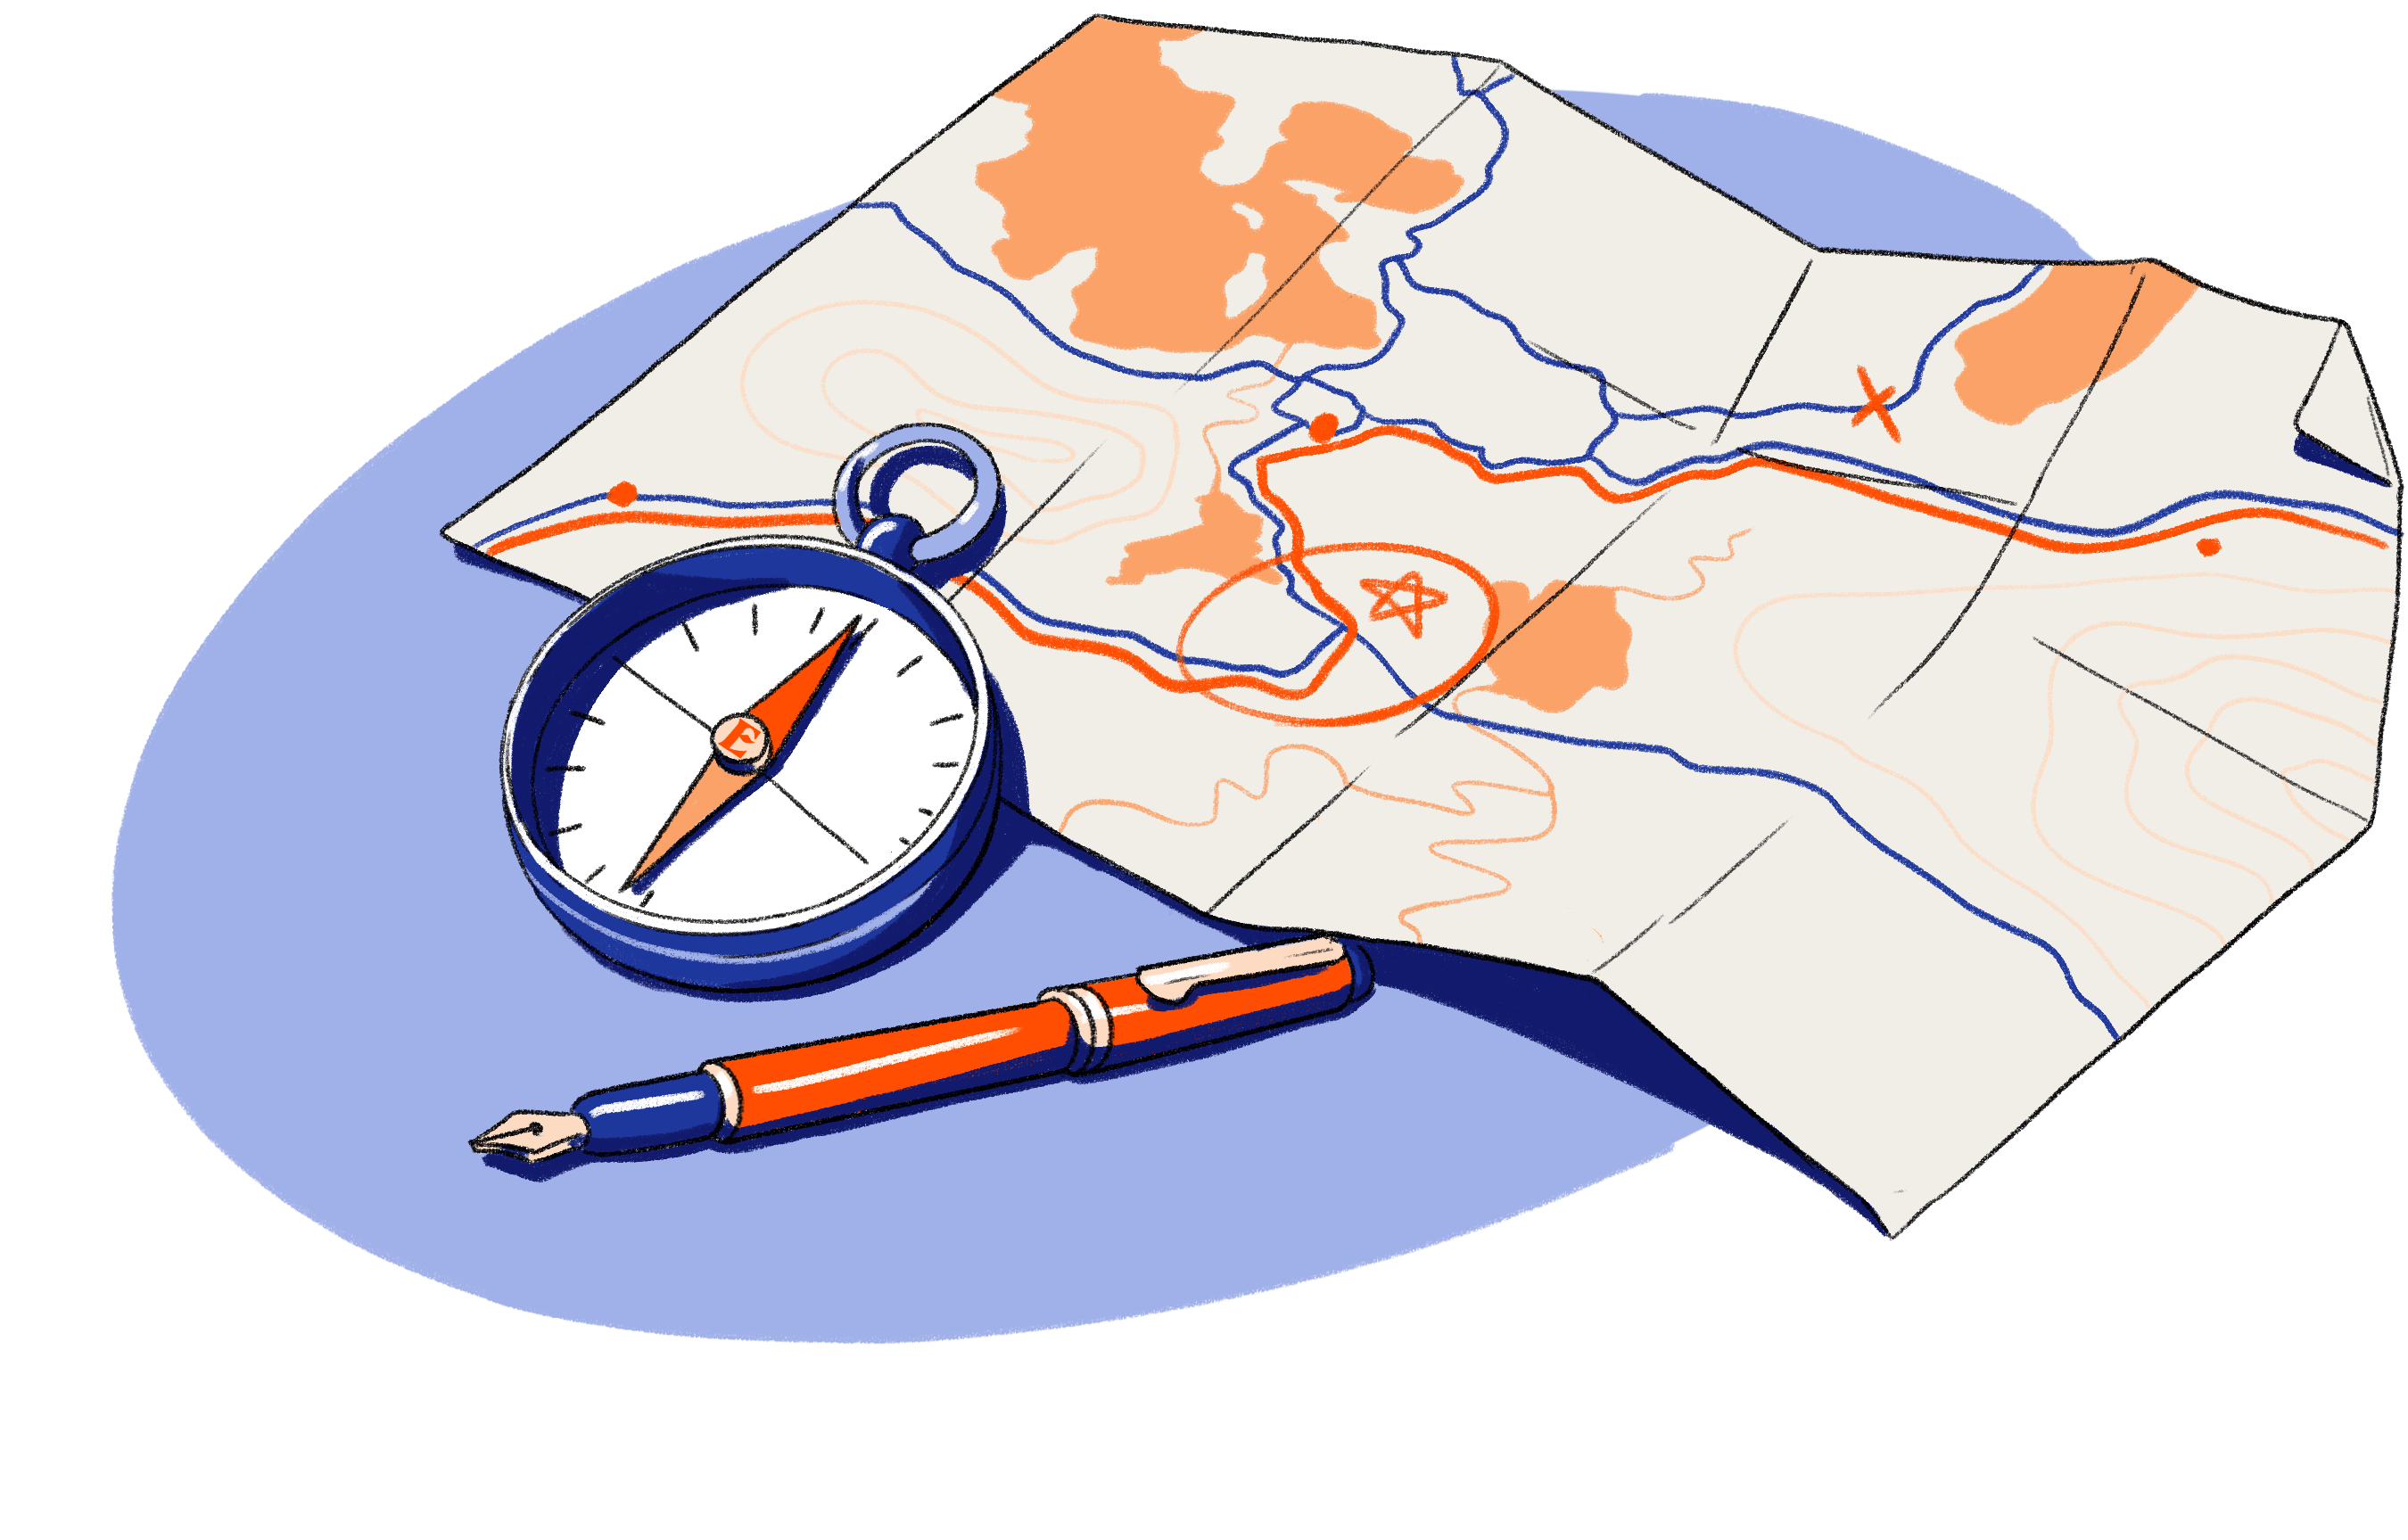 Image of map, compass, and pen charting a path.